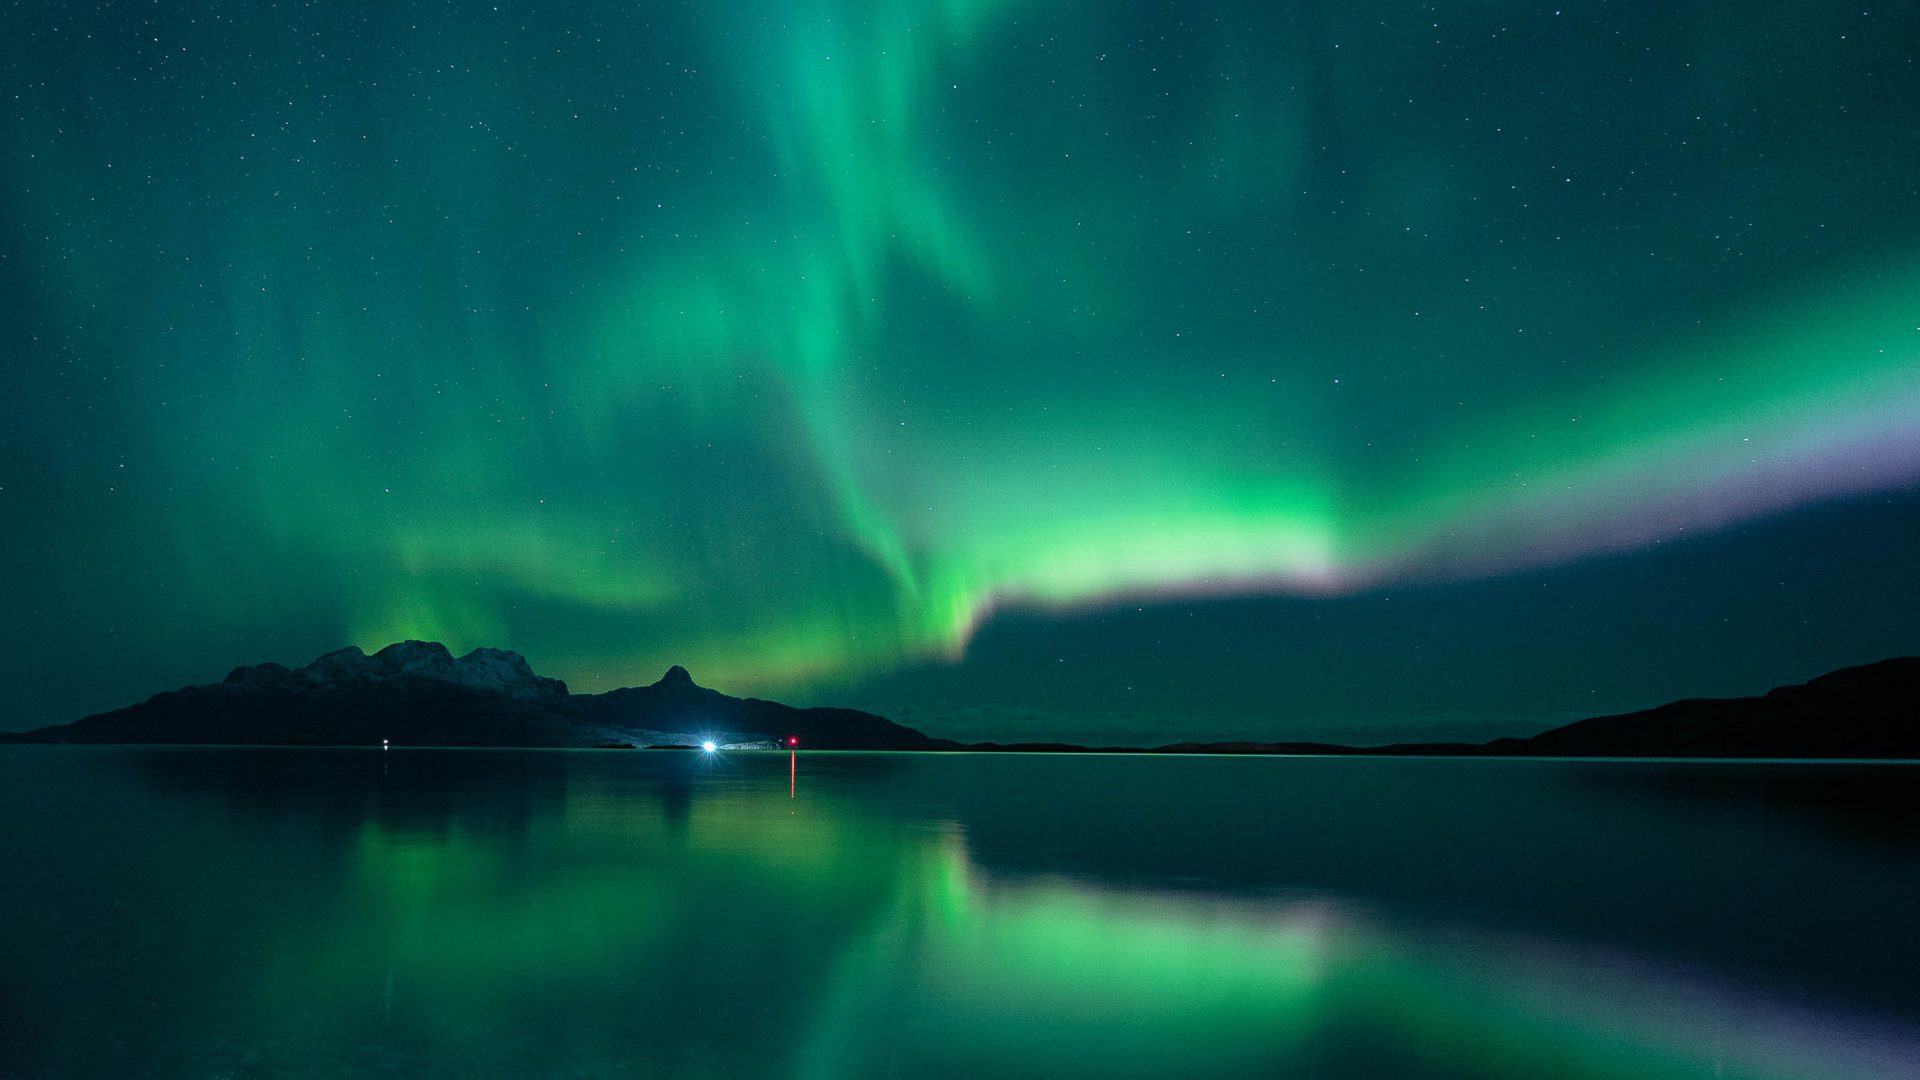 An example of the aurora borealis with a green sky over a still lake.